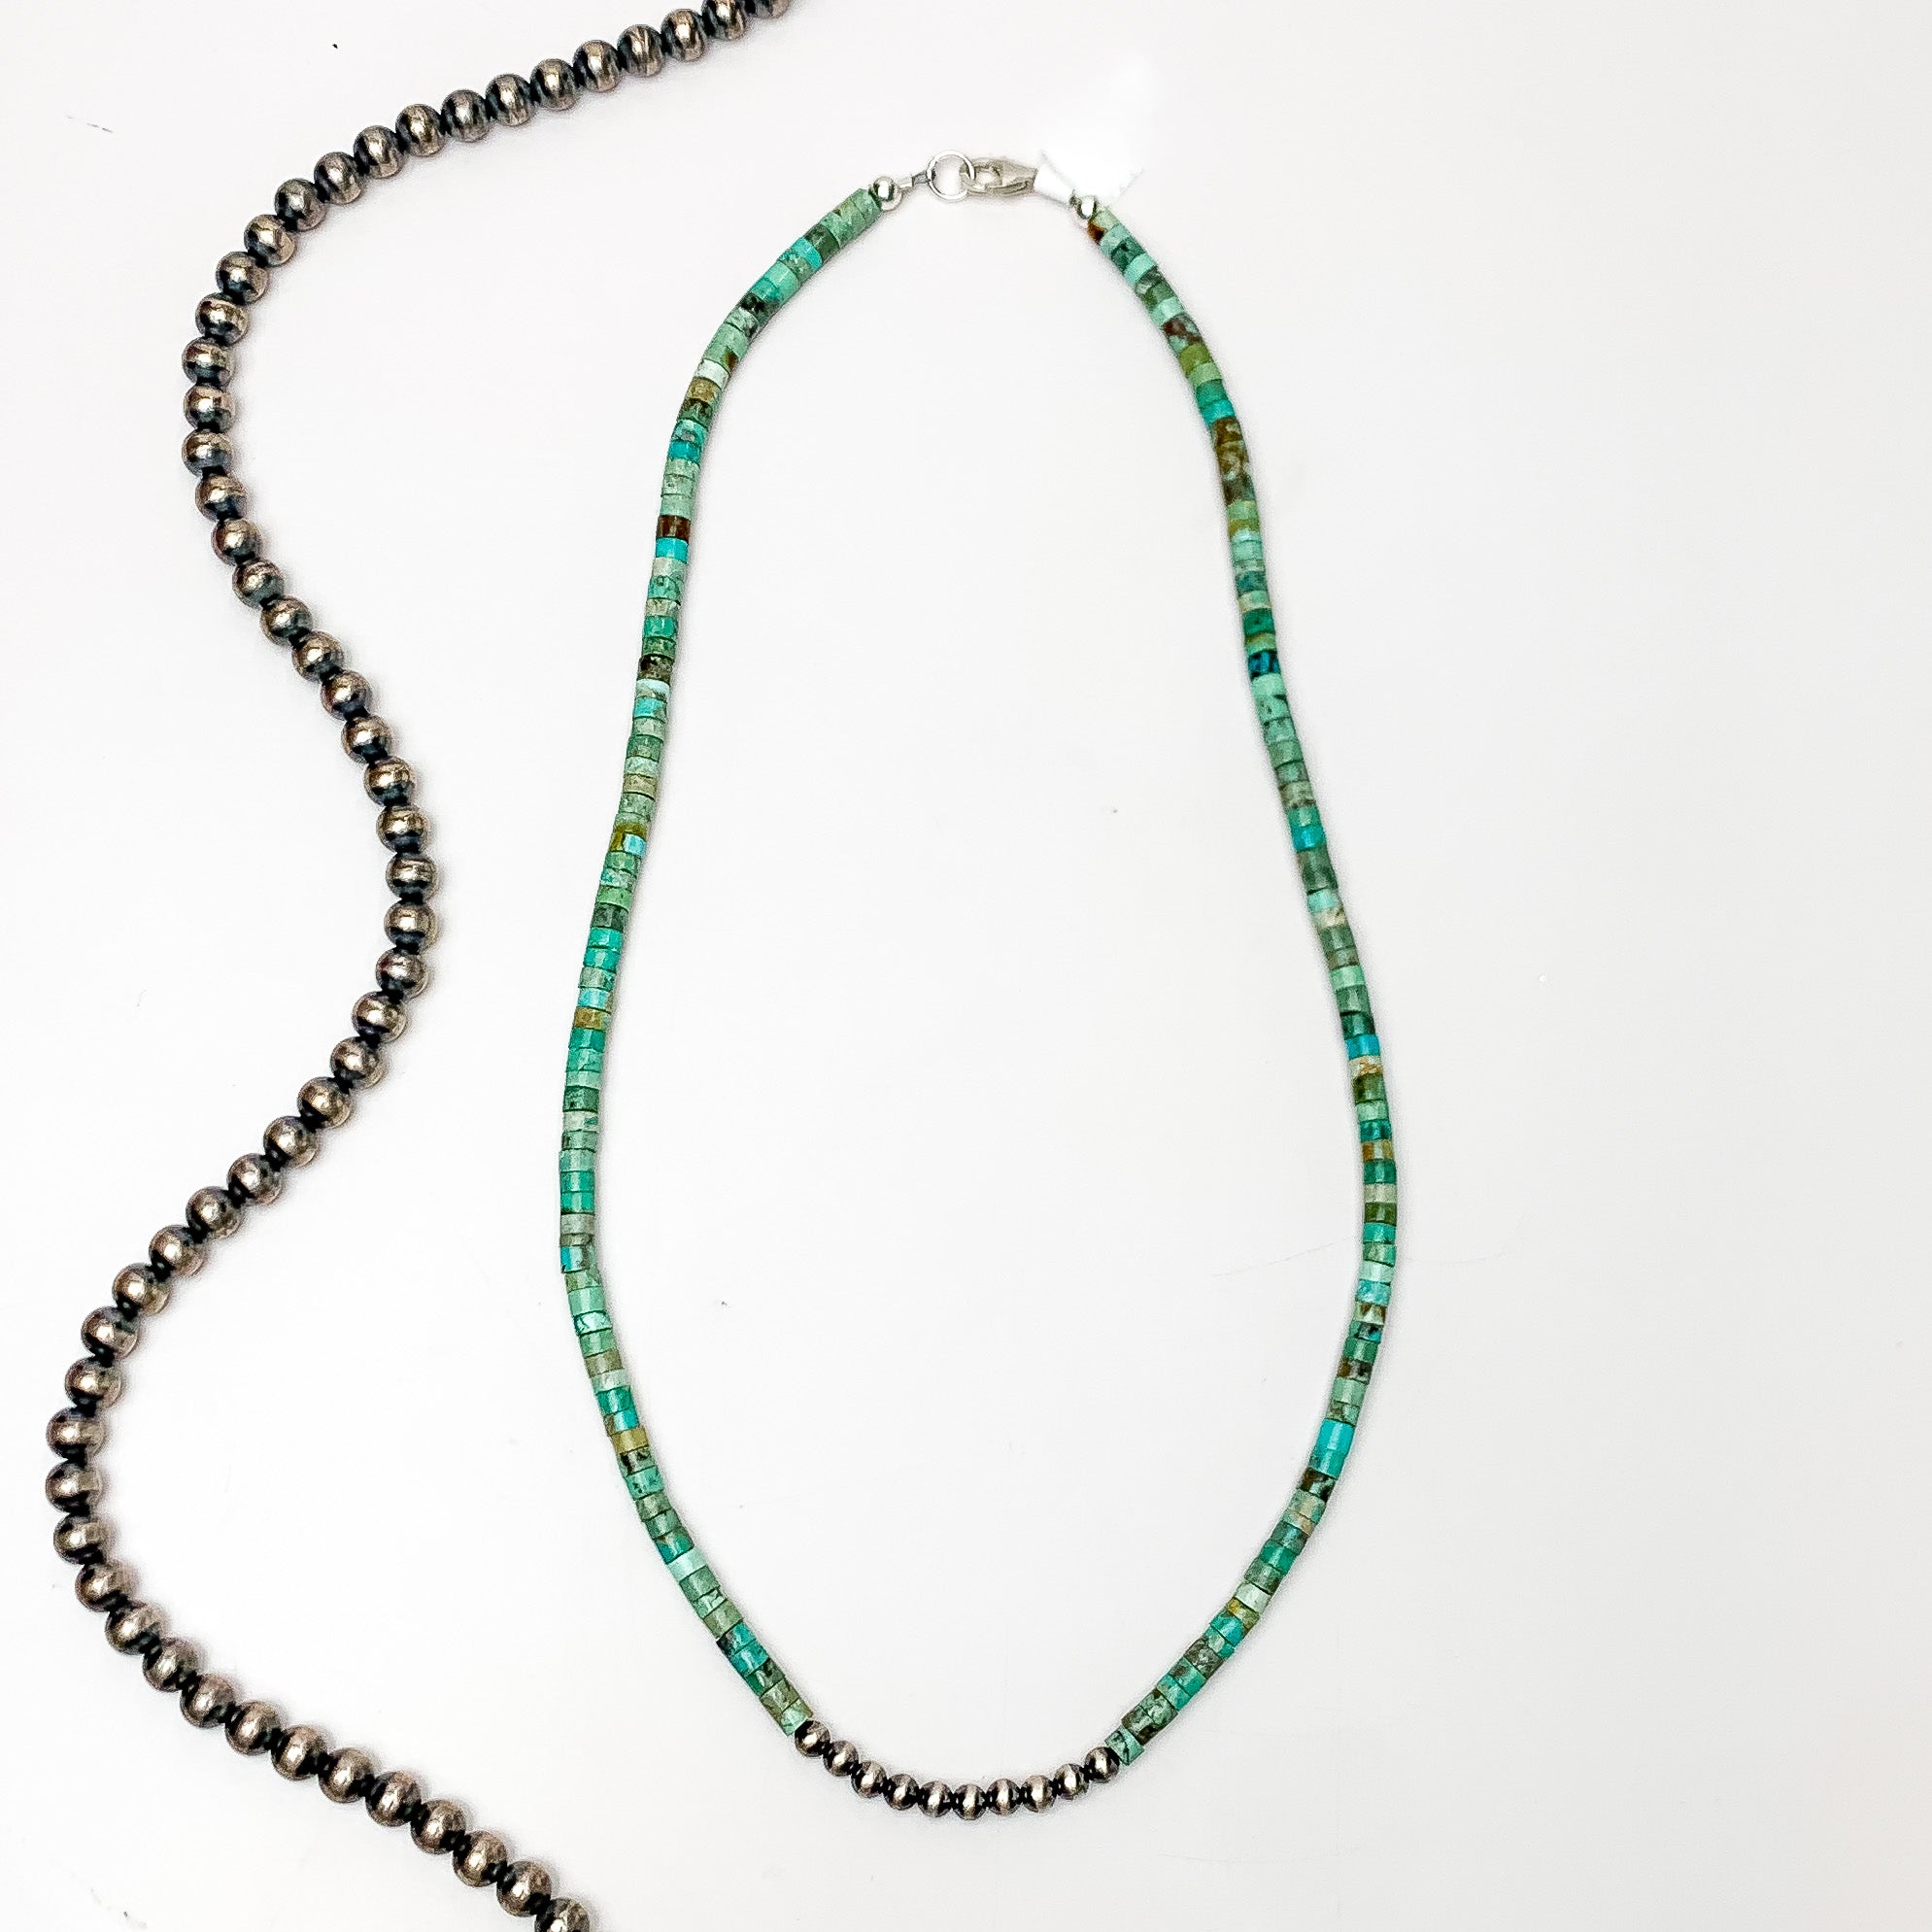 Turquoise chip necklace with silver pearls in the middle of the necklace. This necklace is pictured on a white background with silver beads on the left side. 